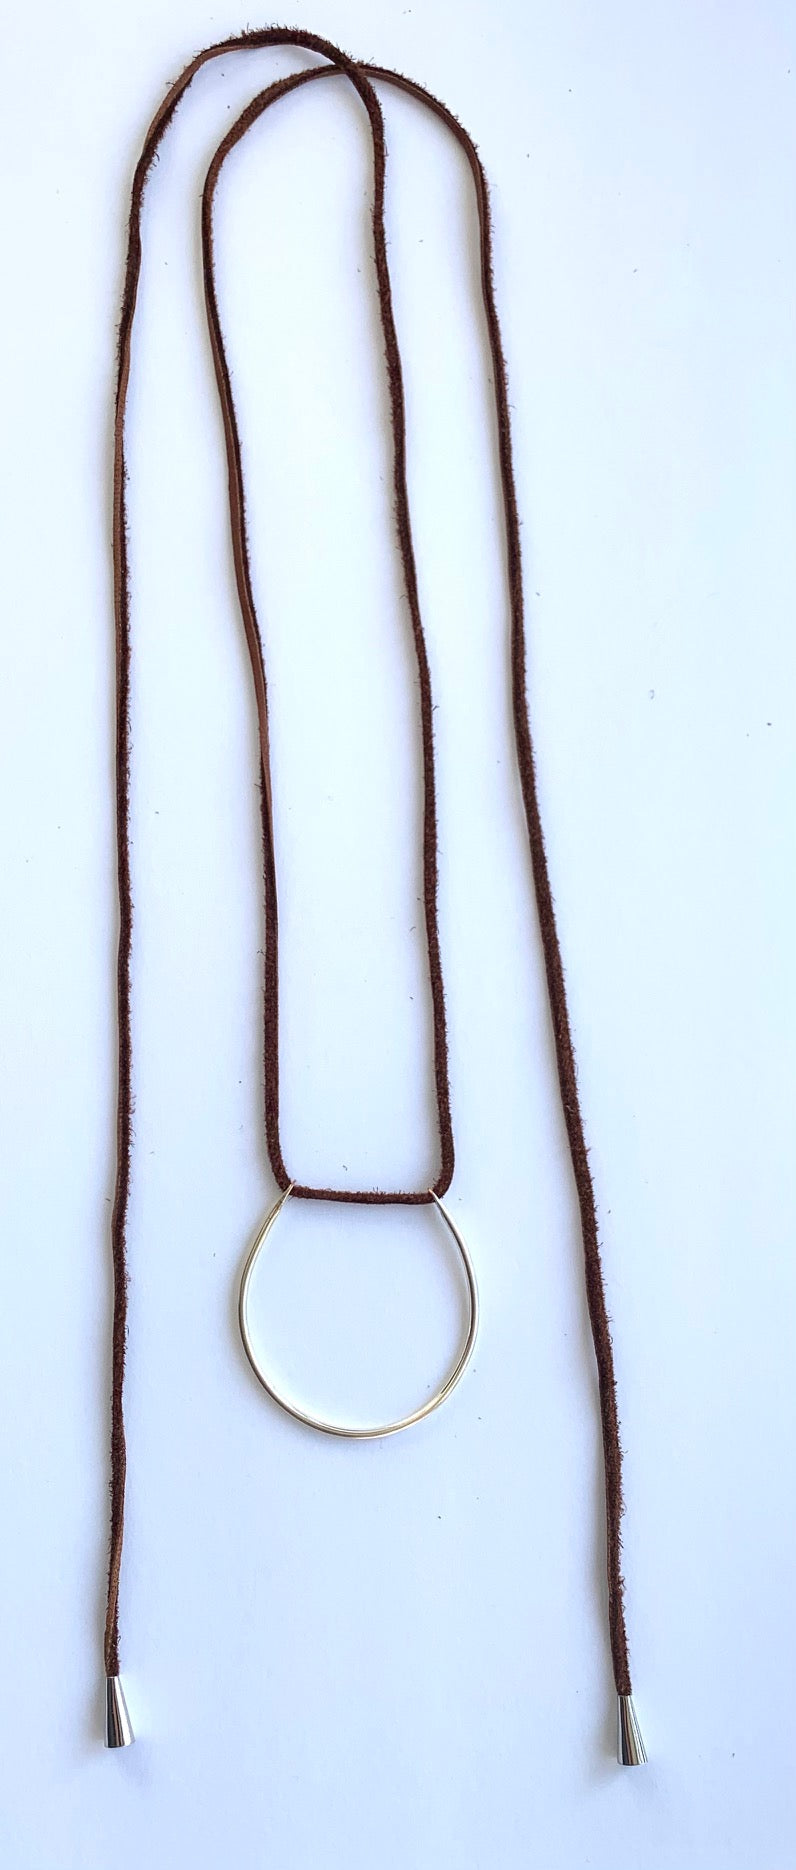 moon phase - silver and brown - necklace